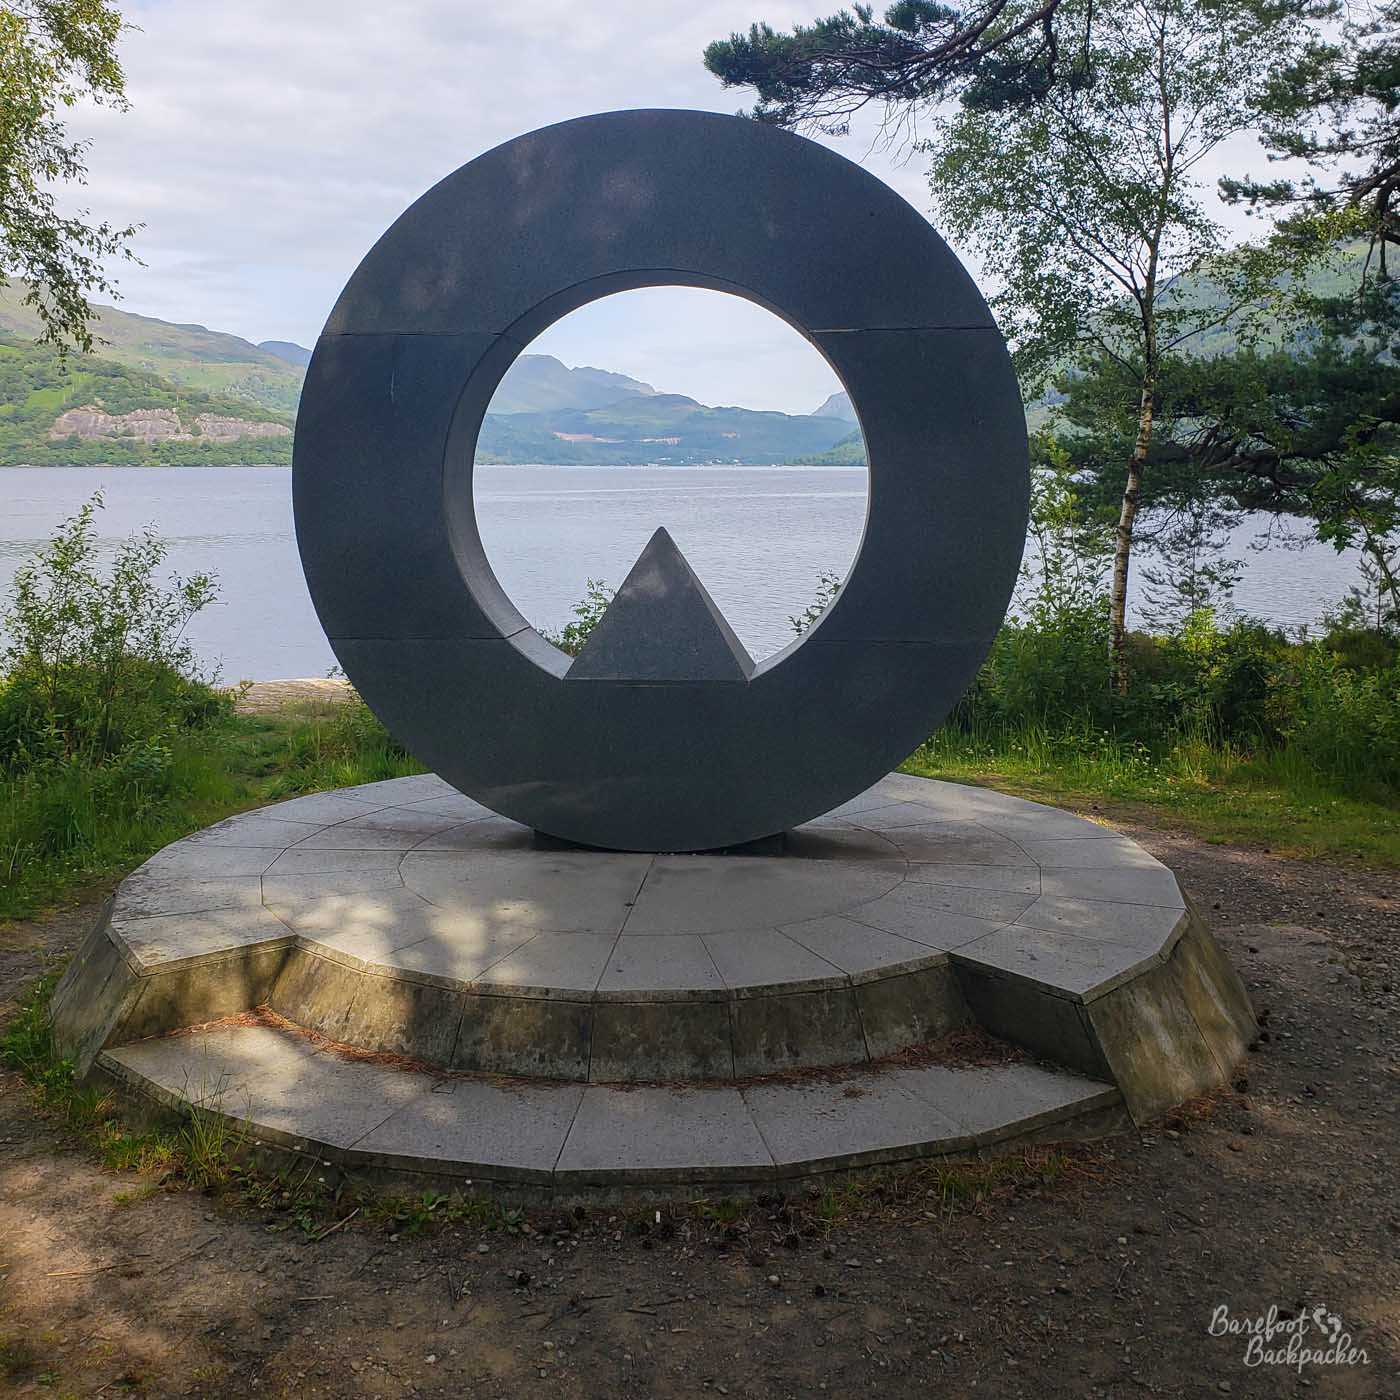 Imagine a metallic ring, wide but not very thick. At the bottom of the ring, covering its thickness, is a small pyramid. Looking beyond the ring is Loch Lomond and the opposite shire in the distance.